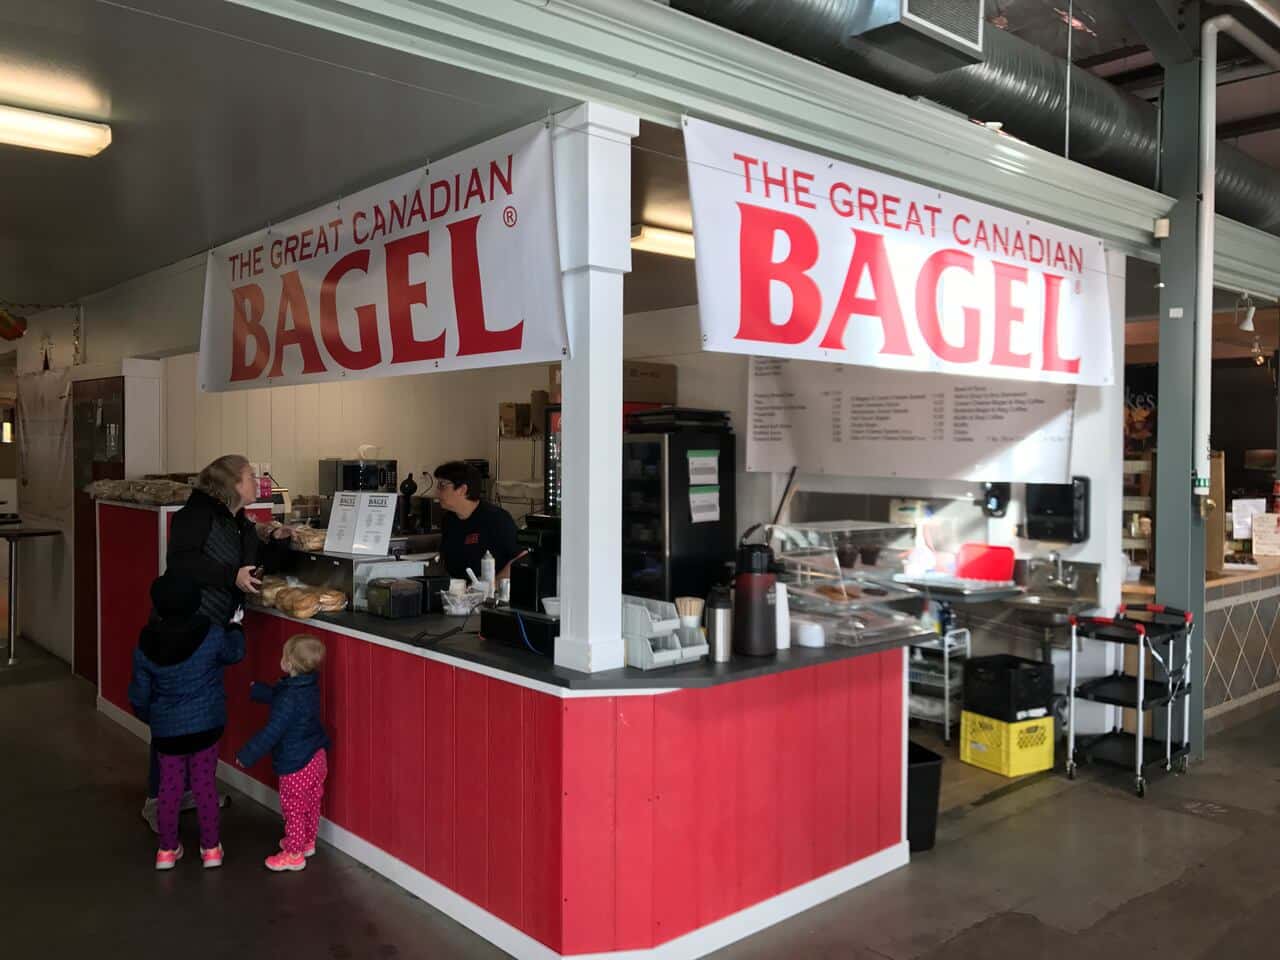 The Great Canadian Bagel Restaurant